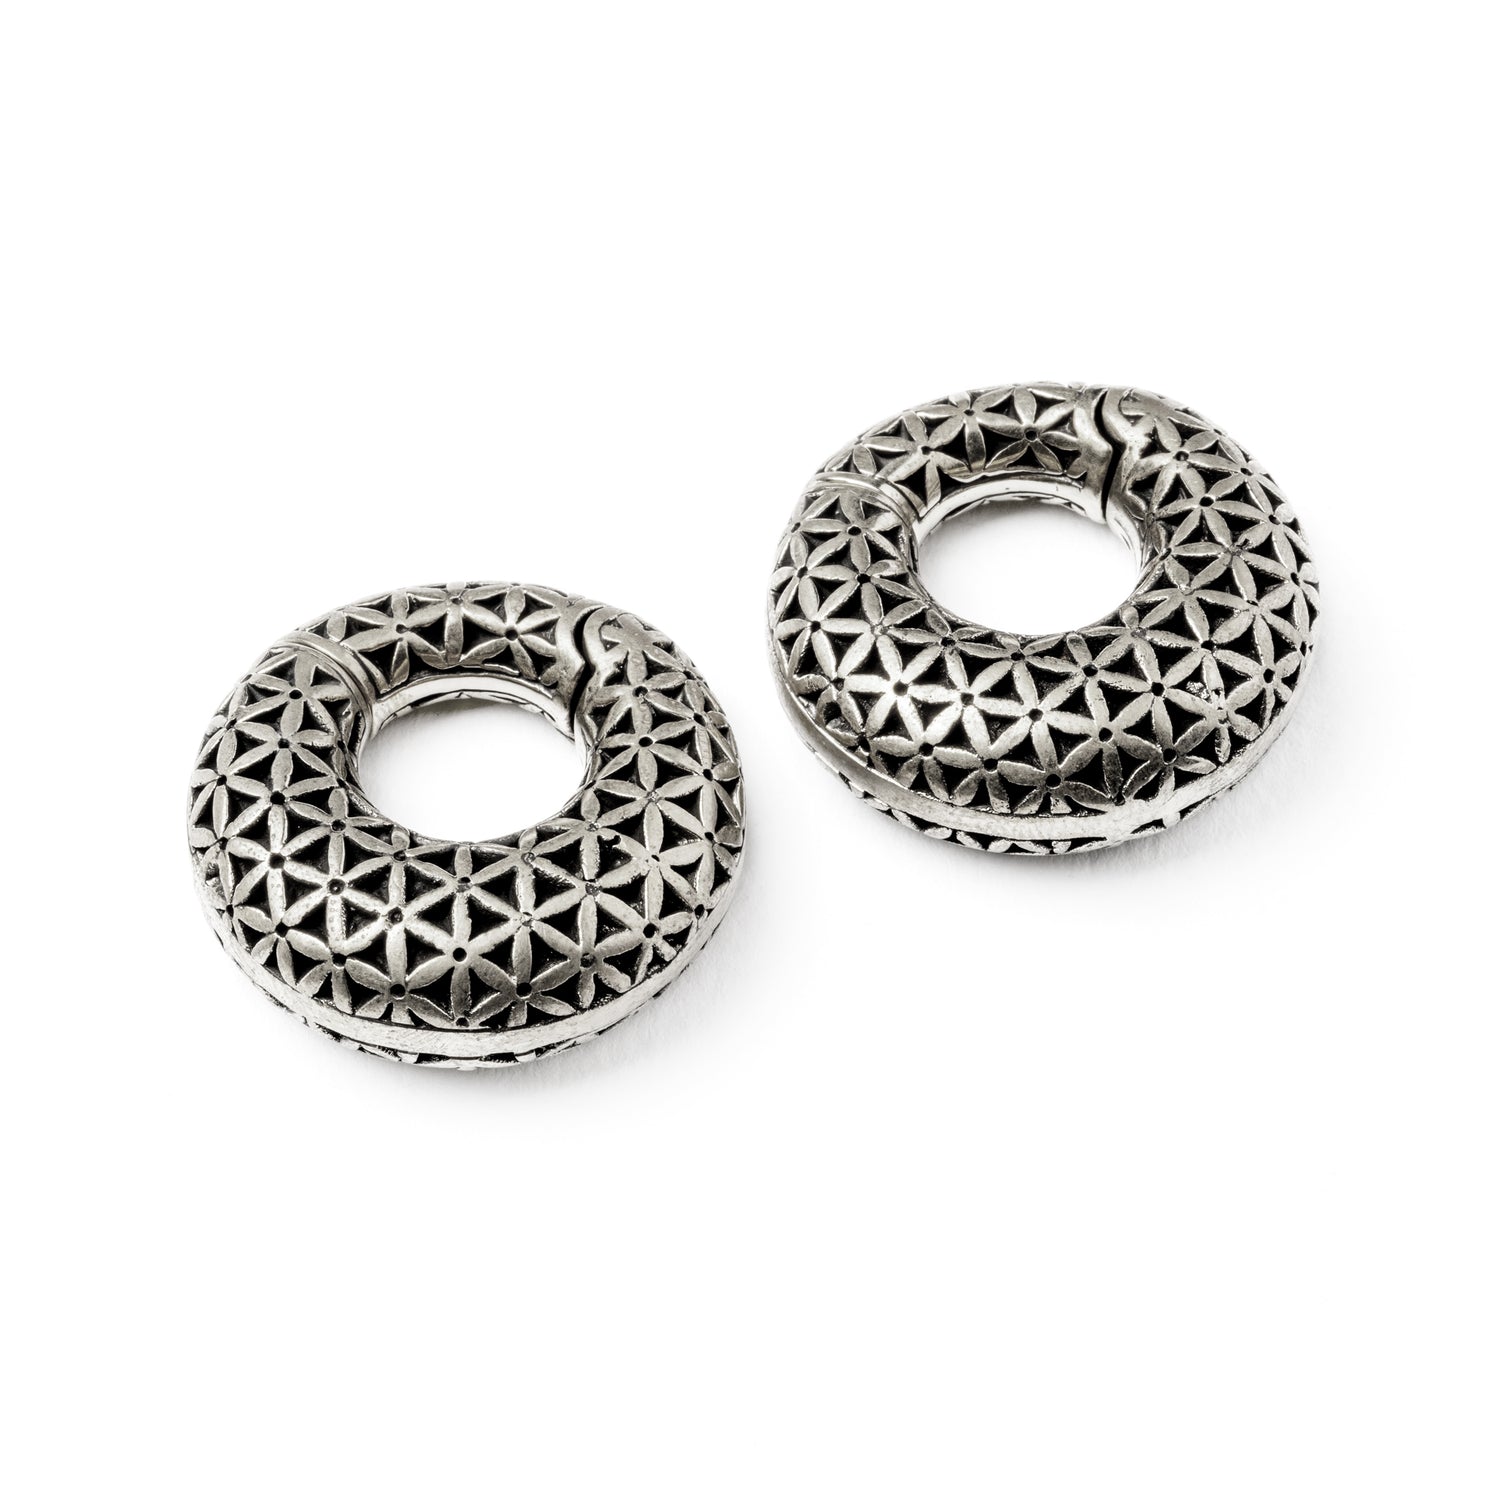 pair of silver brass ear weights hoops with flower of life pattern both sides view